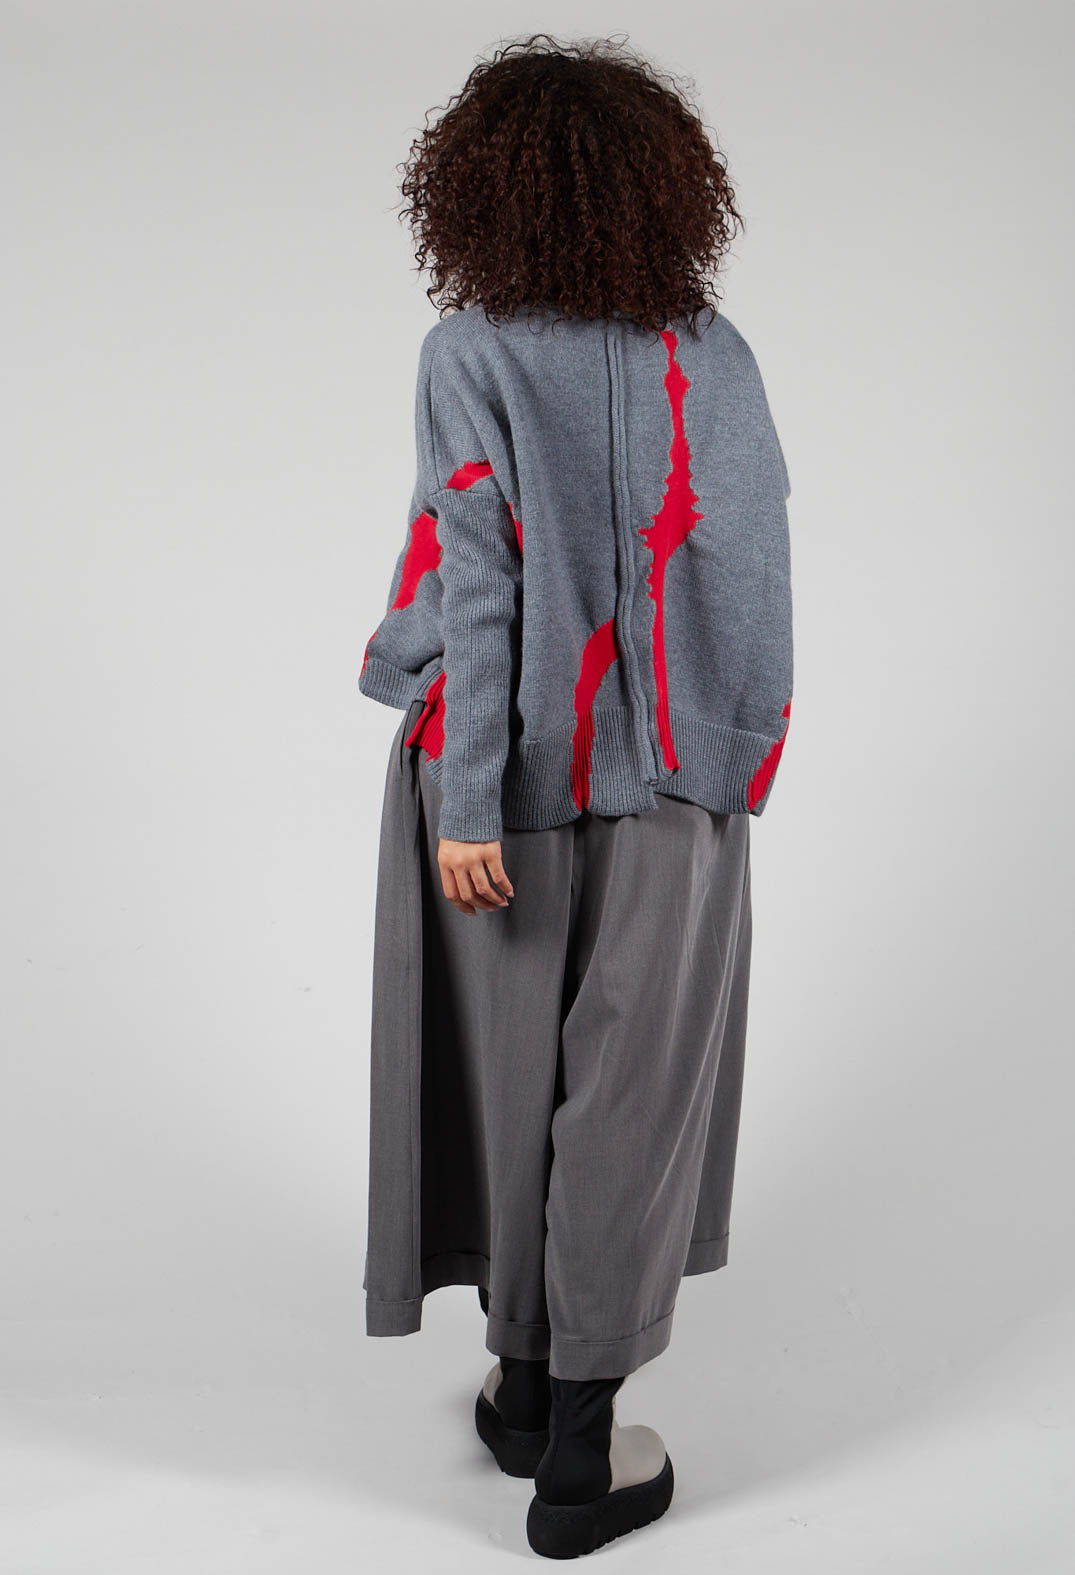 Jumper with Contrasting Inserts in Grey